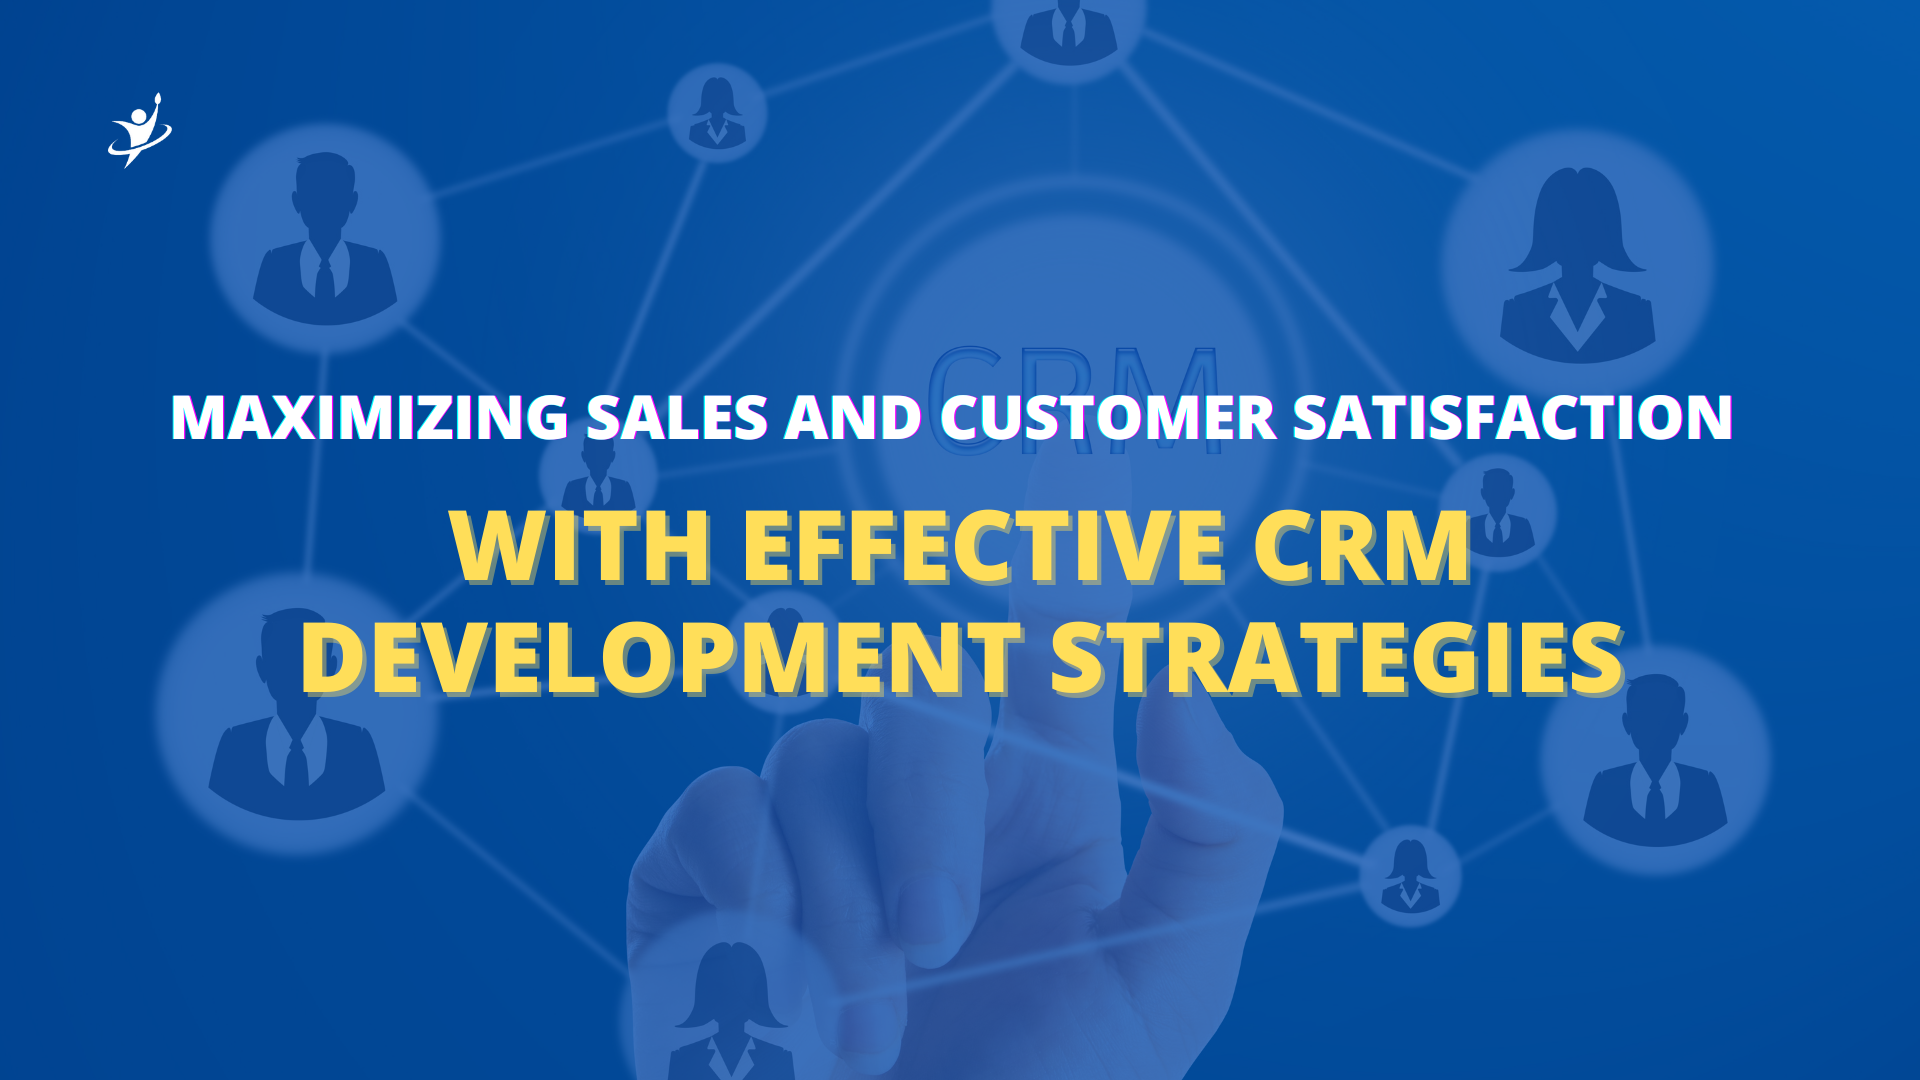 Maximizing Sales and Customer Satisfaction with Effective CRM Development Strategies